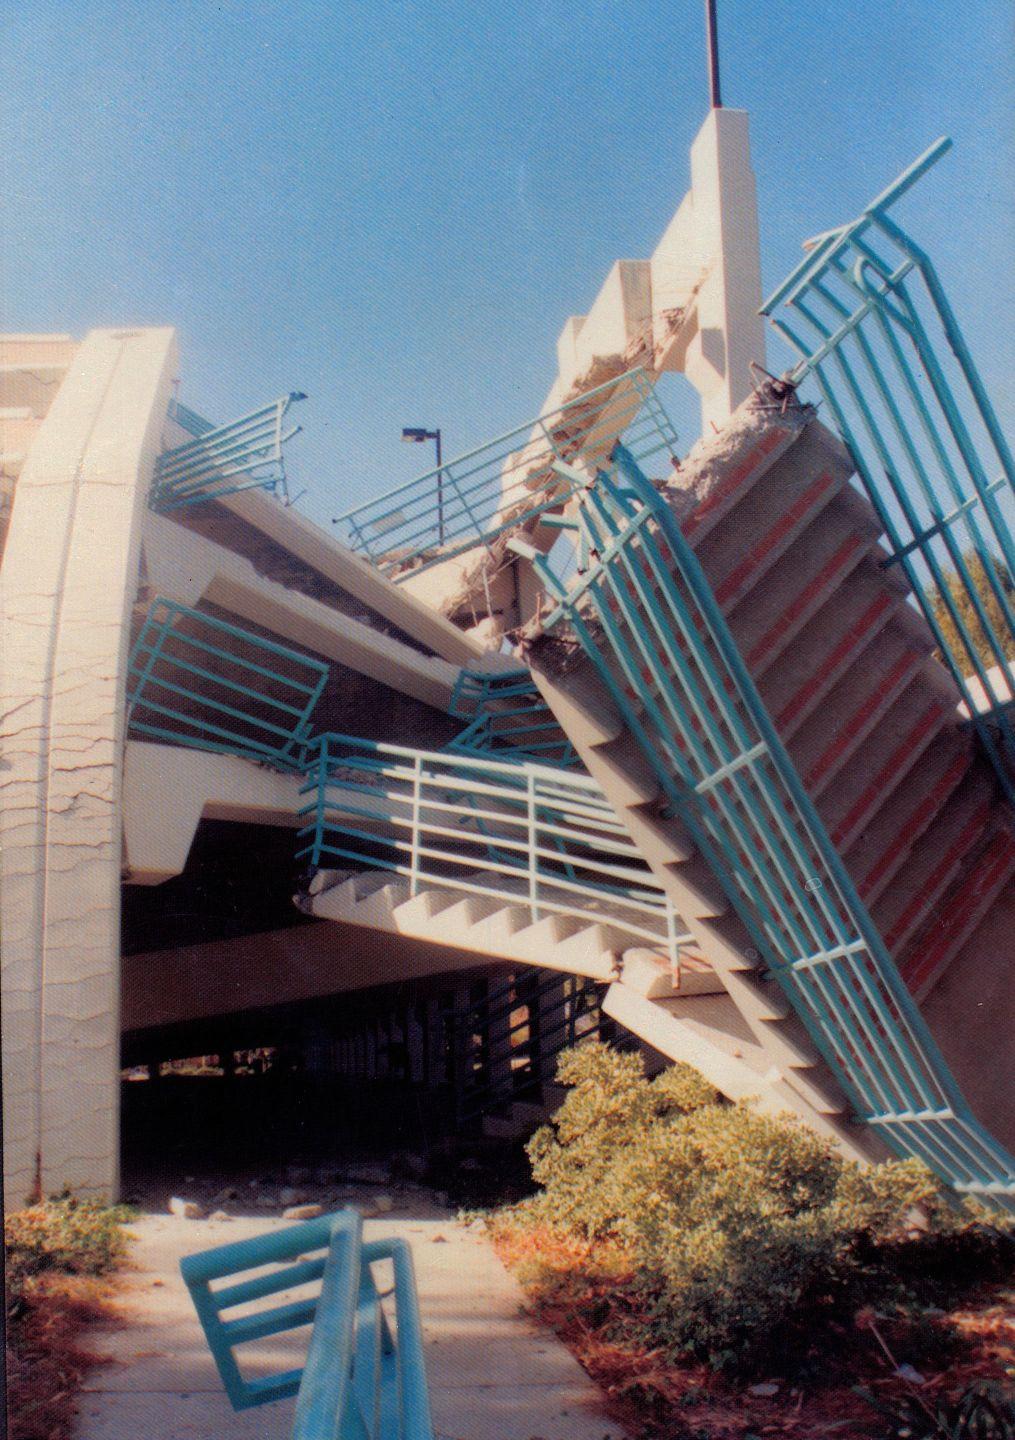 FILE+PHOTO+-+The+1994+Earthquake+has+destroyed+Parking+Structure+C+on+Jan.+17%2C+1994+in+Northridge%2C+Calif.